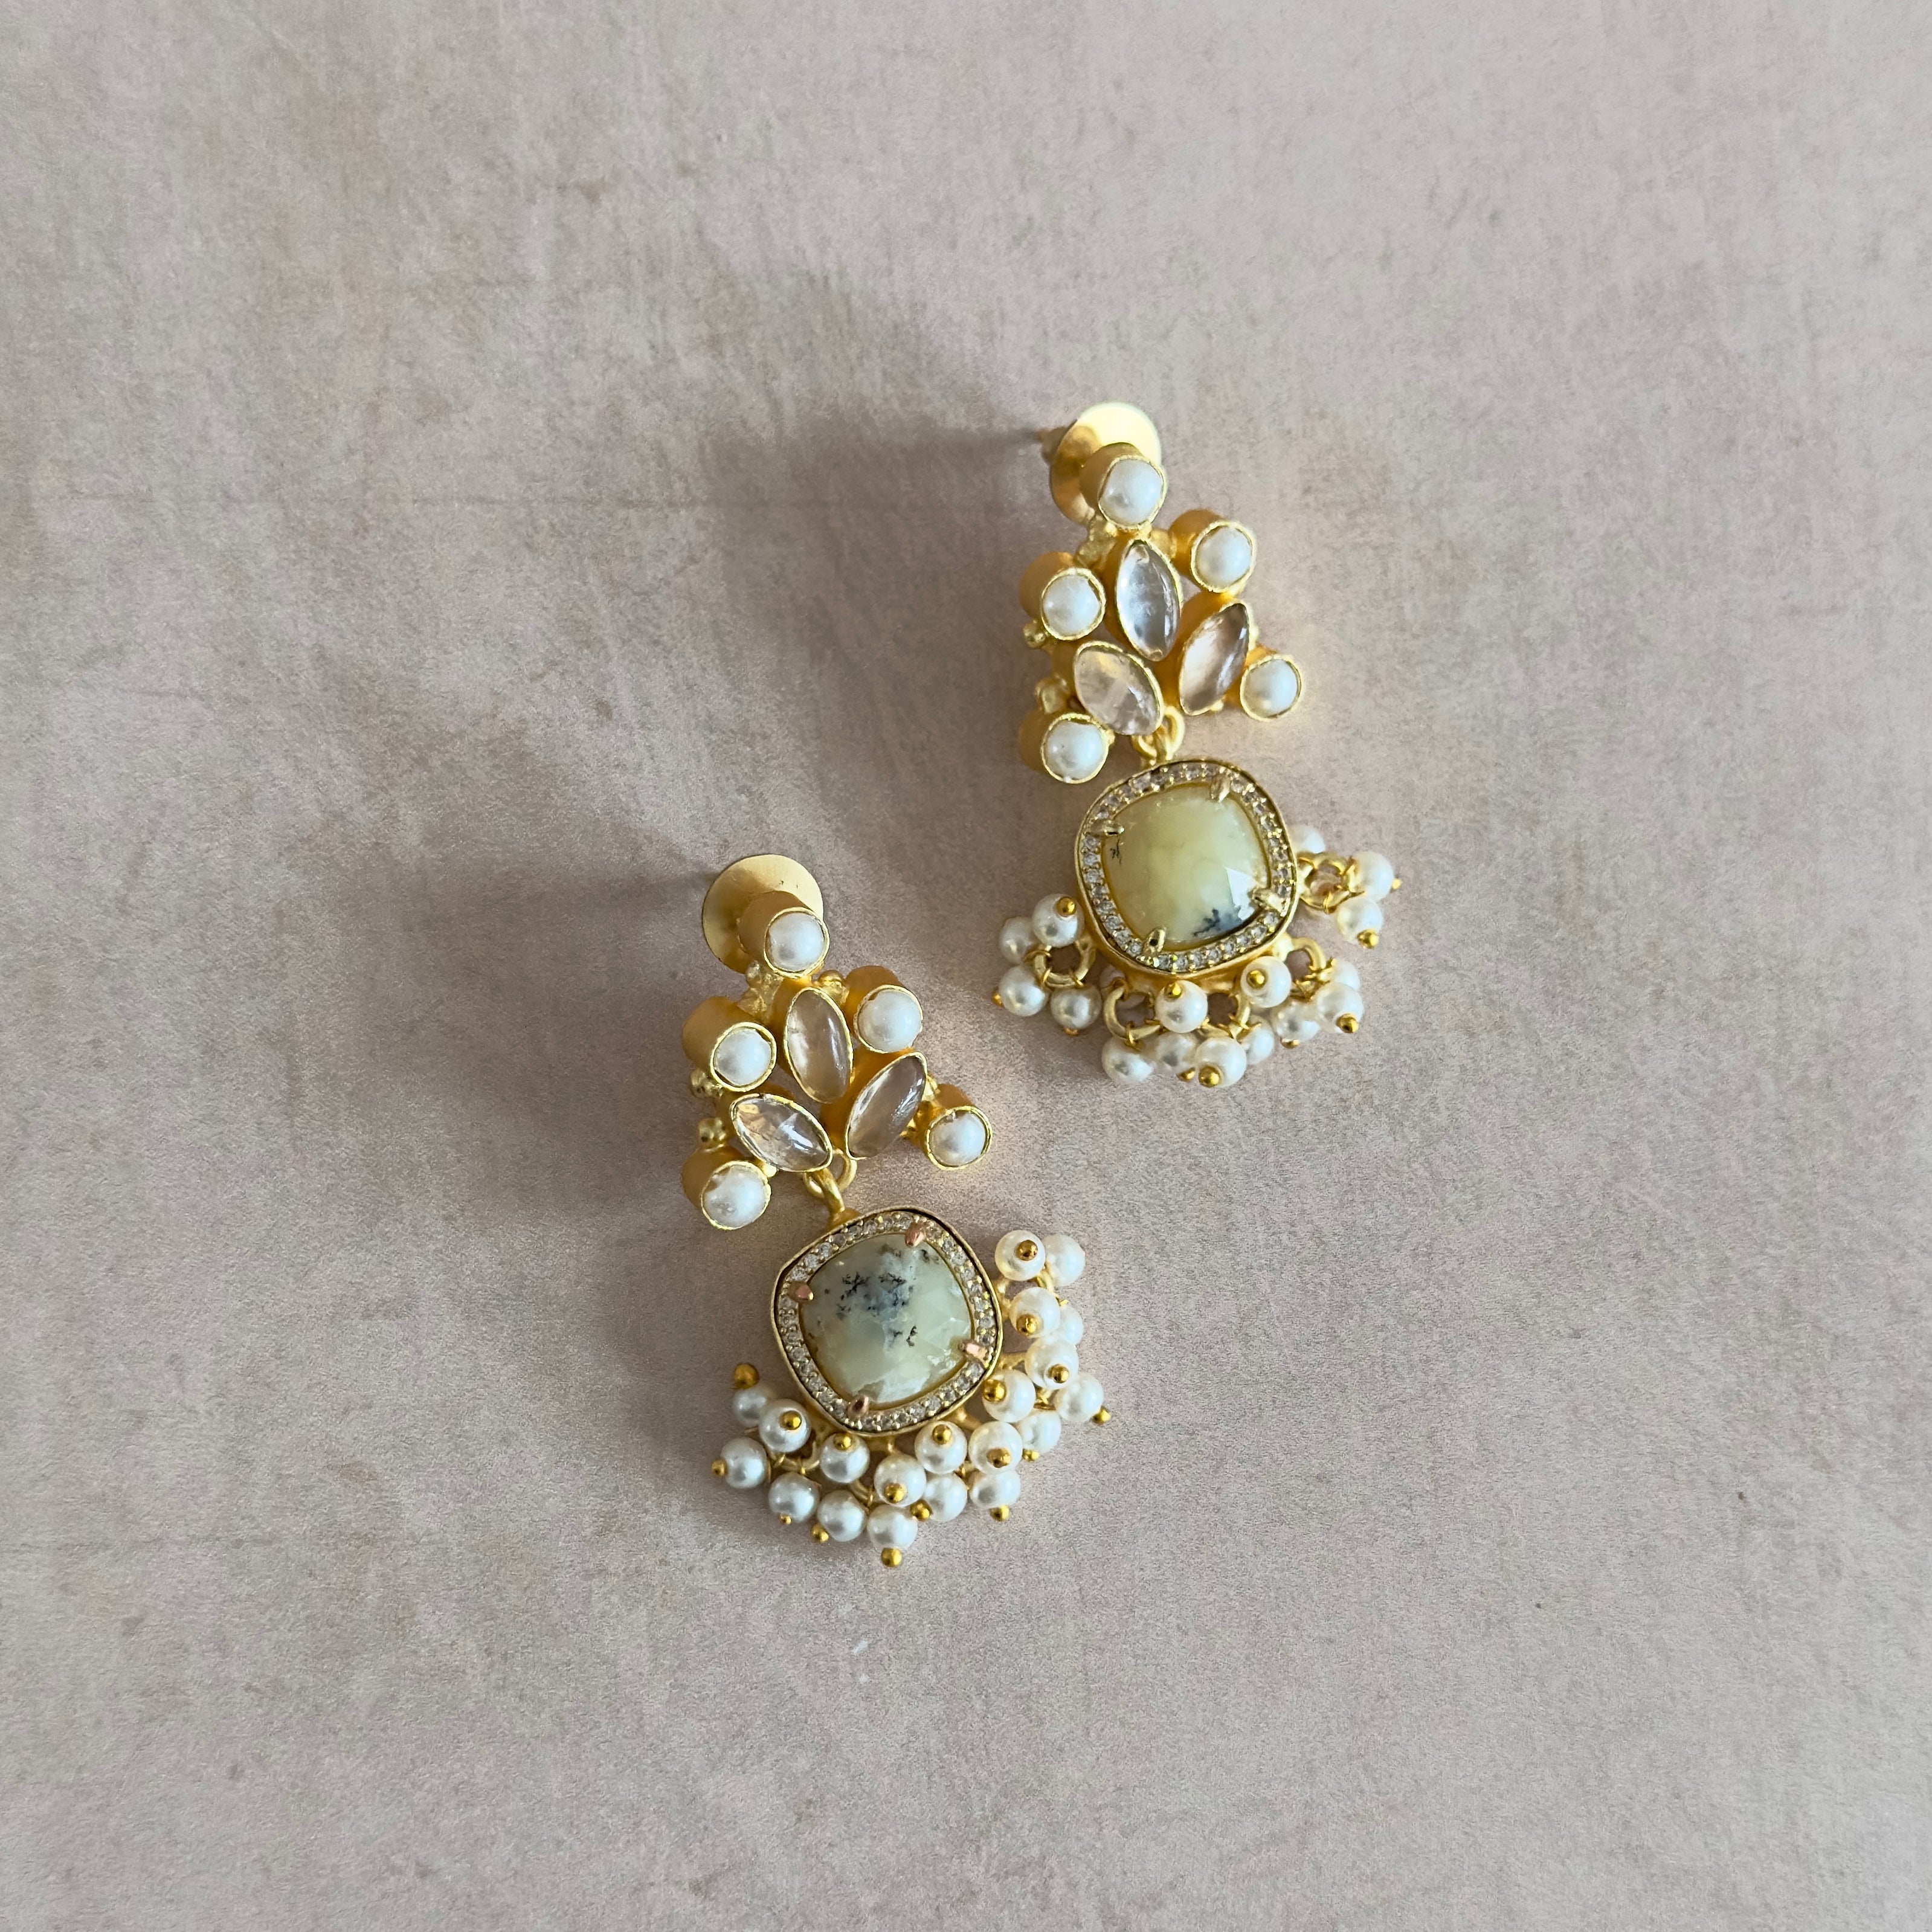 Add a touch of elegance to any outfit with our Priti Drop Earrings. Designed with a cute drop design and multi gemstones in hues of pearl and pastels, these earrings exude charm and sophistication. Elevate your style and feel confident with these beautiful and versatile earrings!